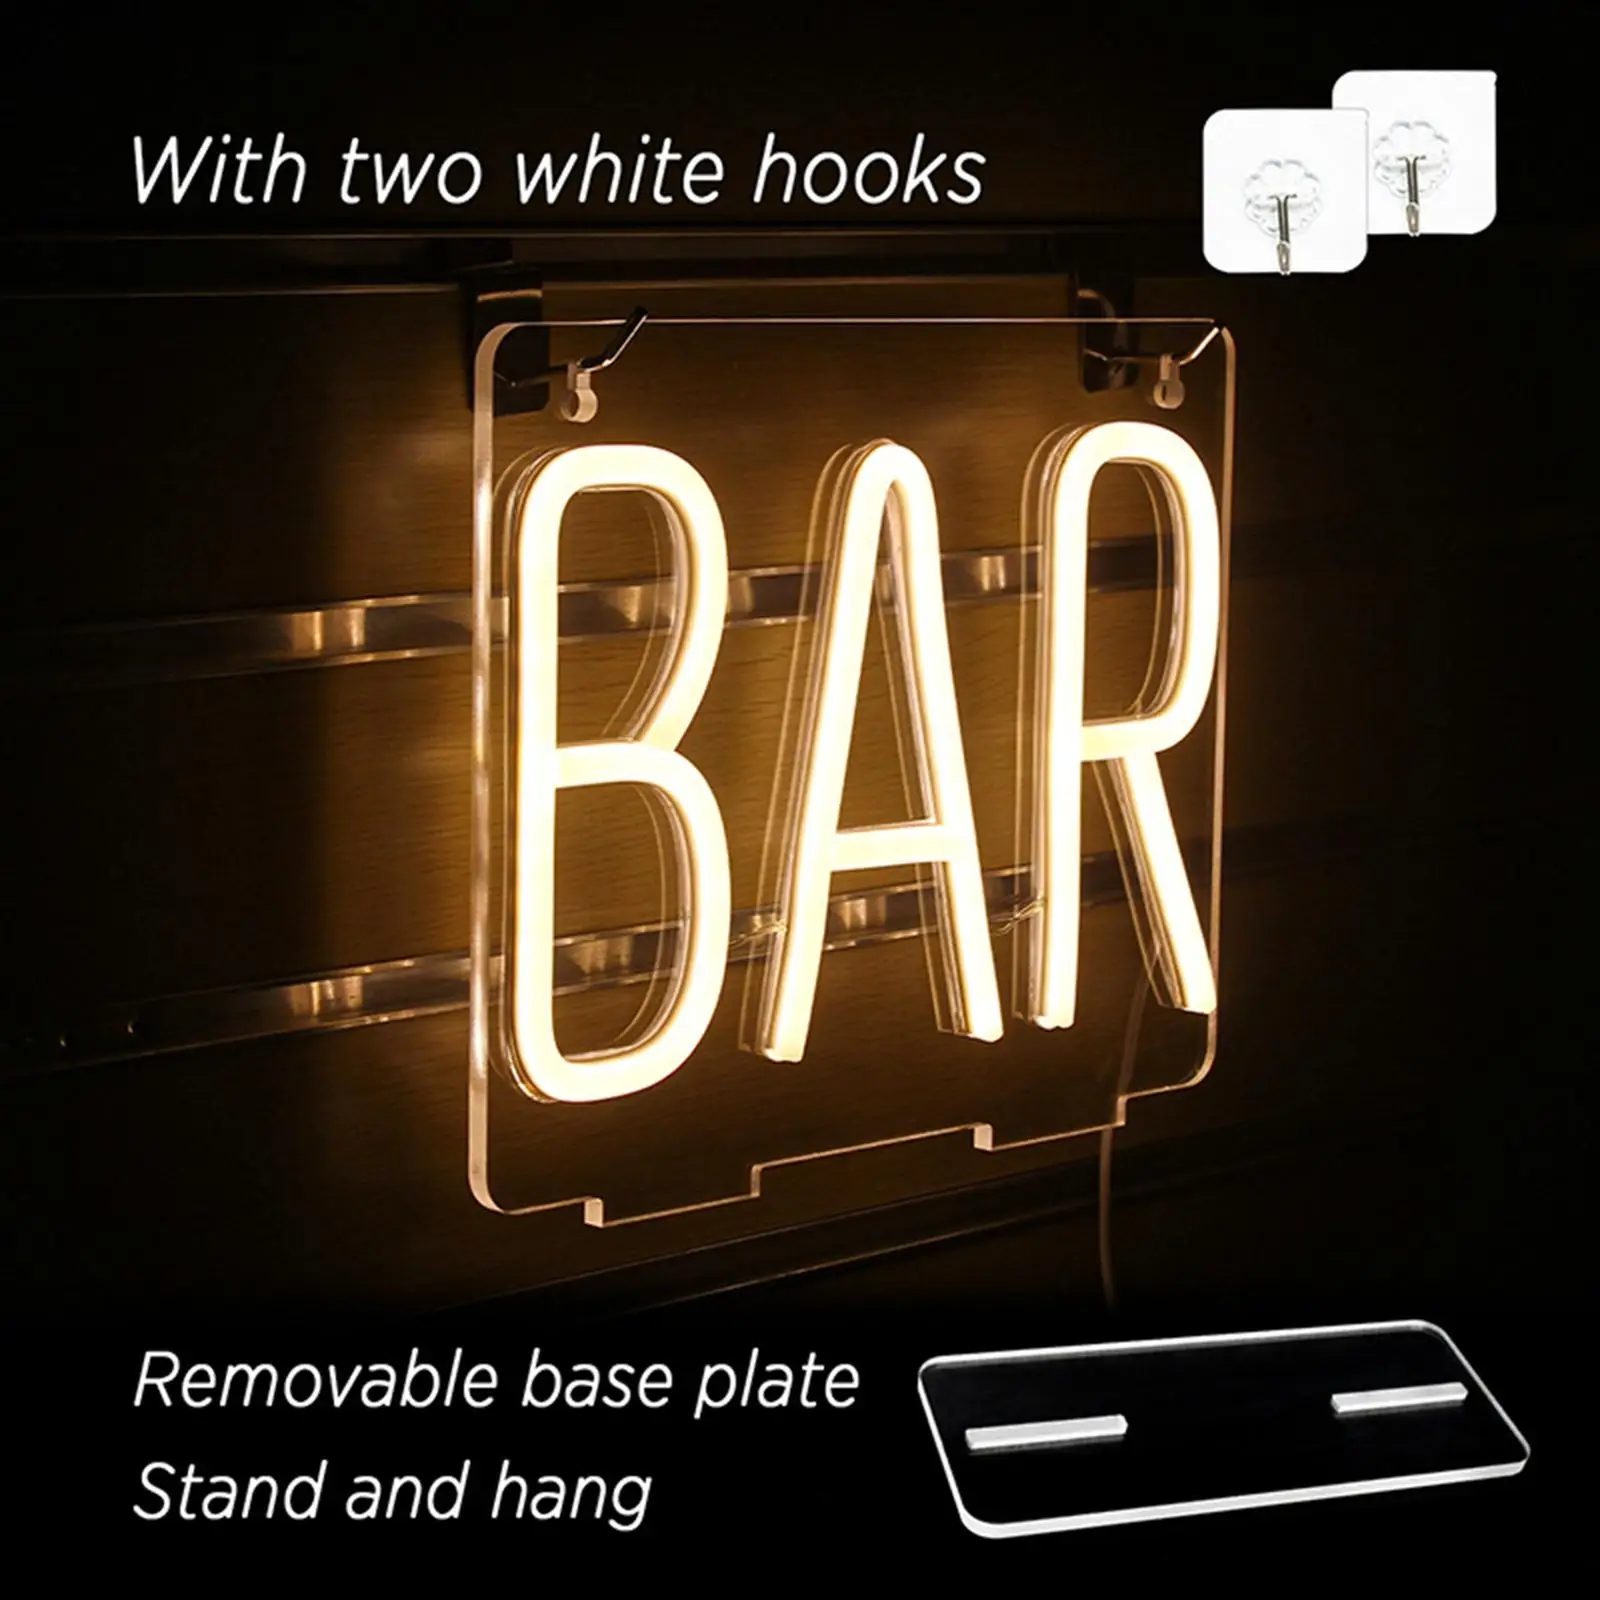 Bar LED Signs Lights Neon Sign Decoration Wall Hanging or Free Standing 1.5M Cable Bar Pub Home Party Decorative Lighting